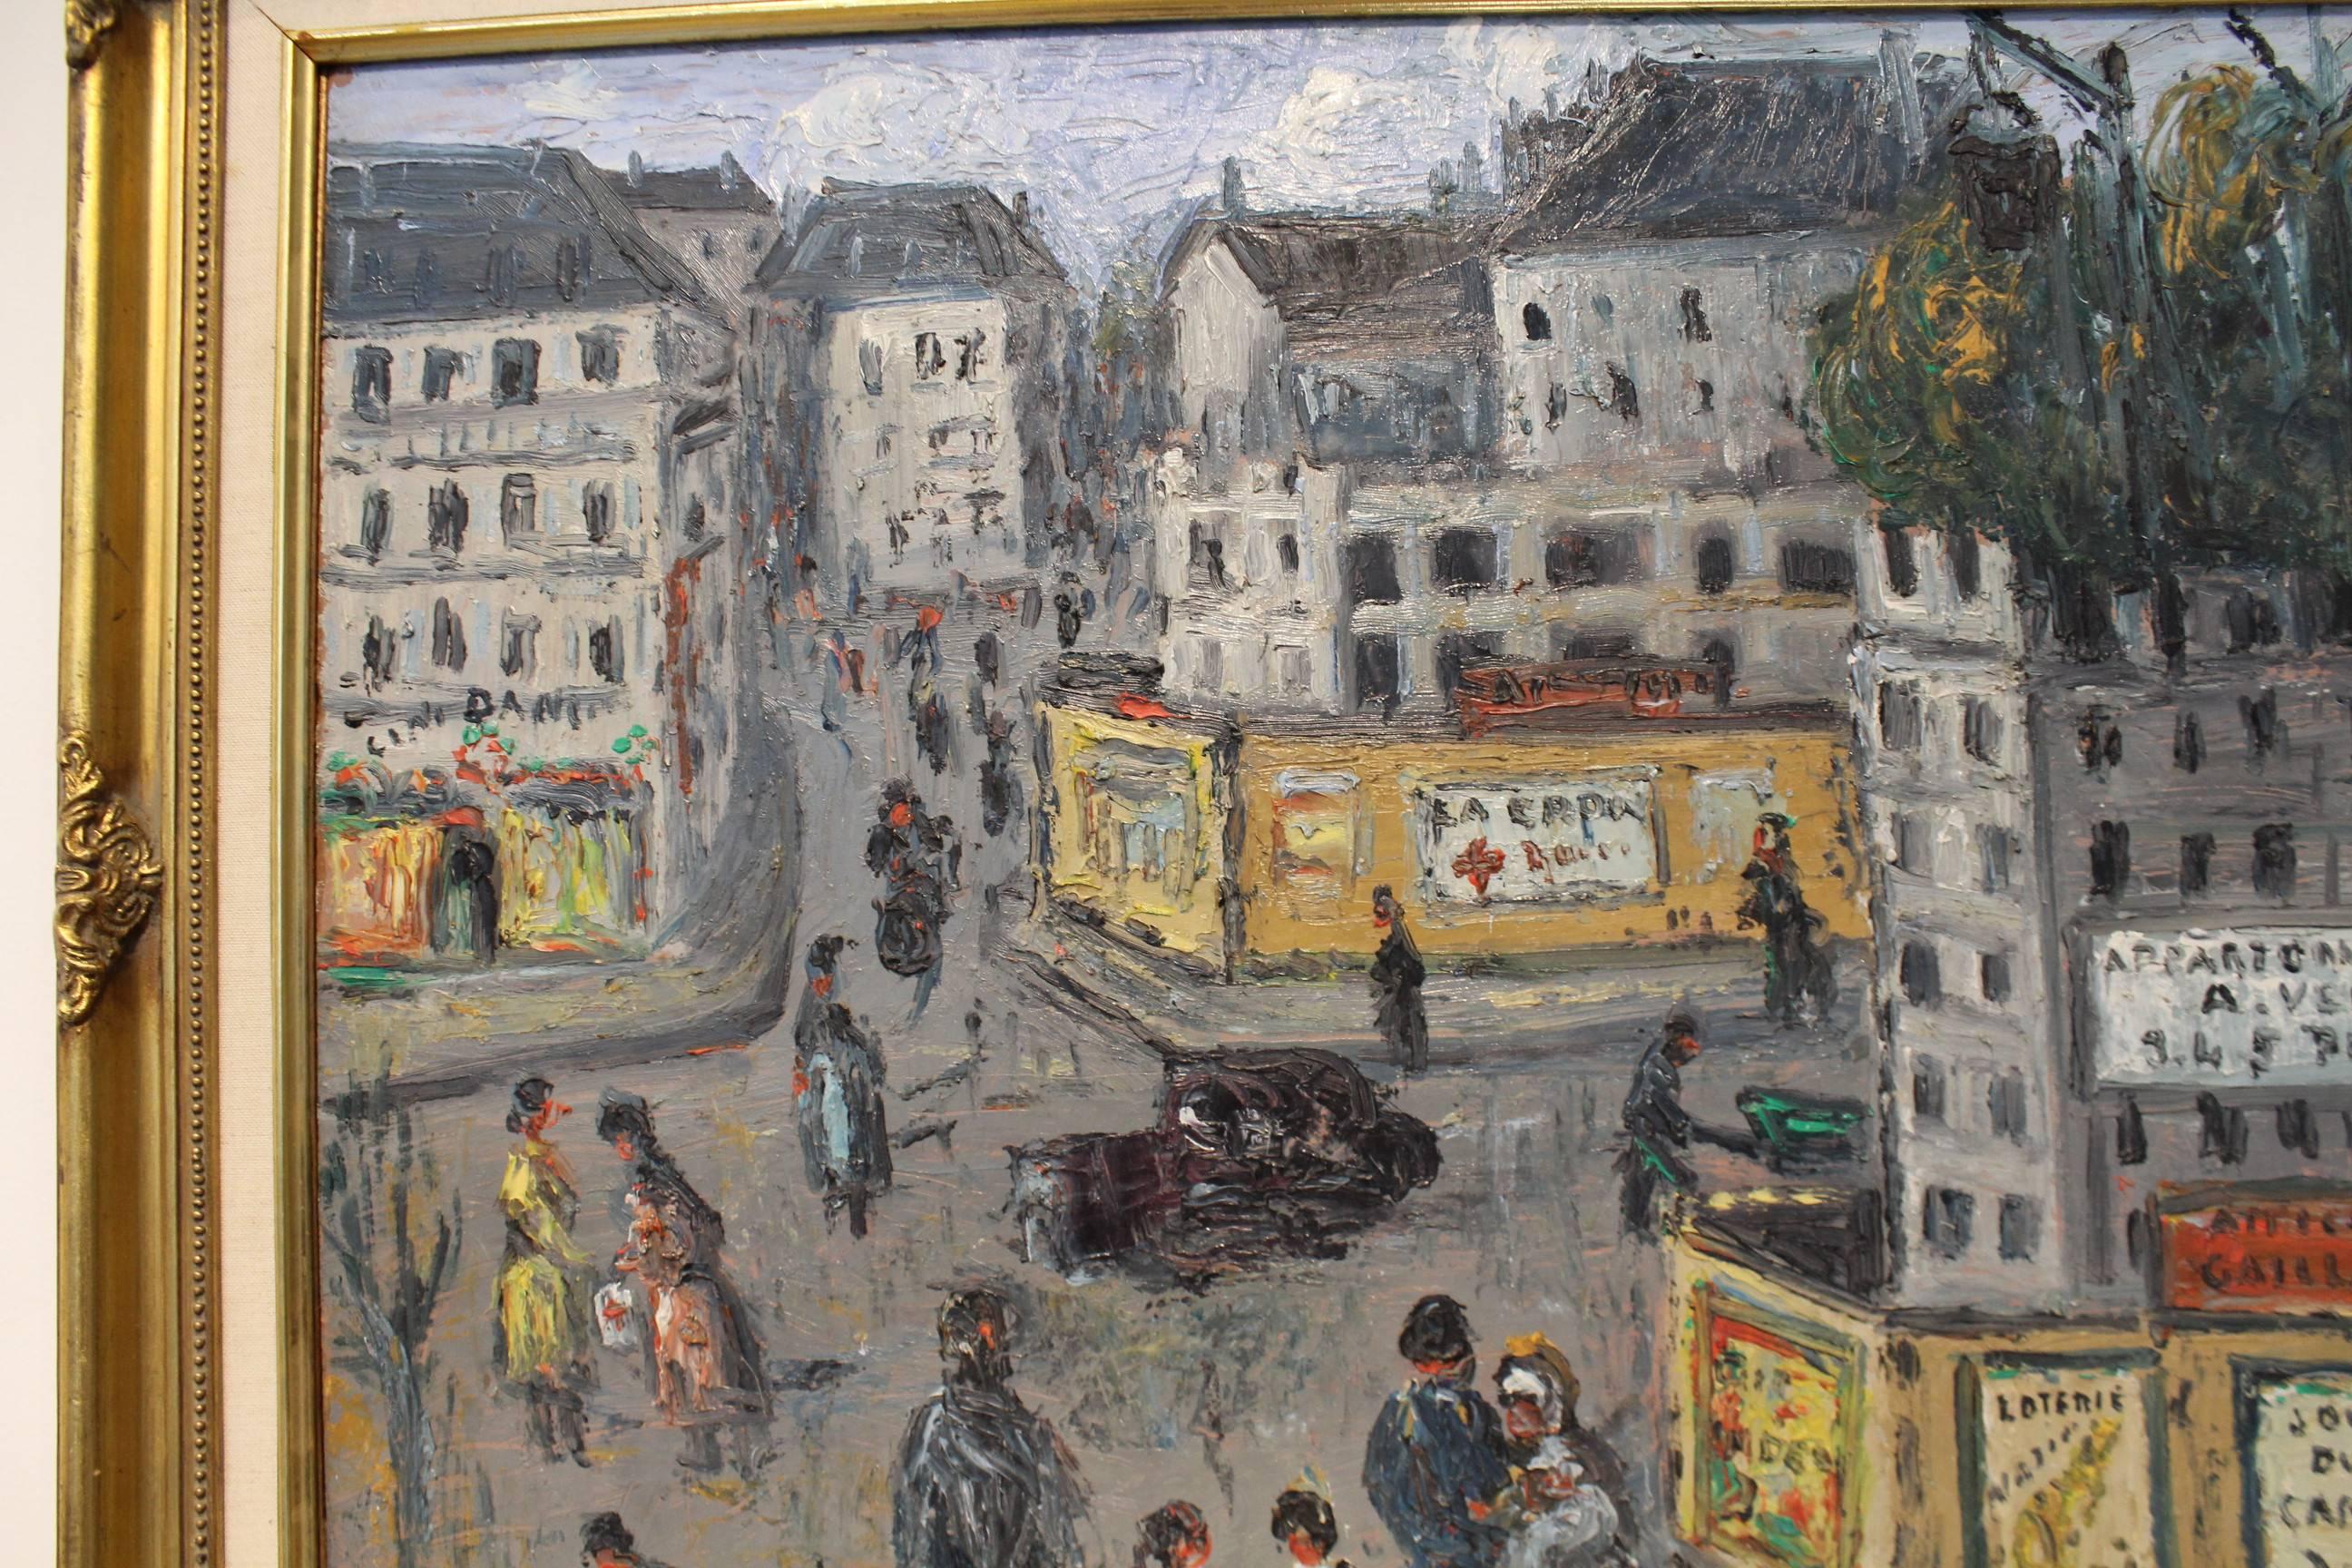 Painted in a confident yet brut fashion, this unique painting of a Parisian intersection captures the hustle and bustle of a real Parisian neighborhood away from the tourist thoroughfares. Note the signs of construction/demolition and adverts. Oil